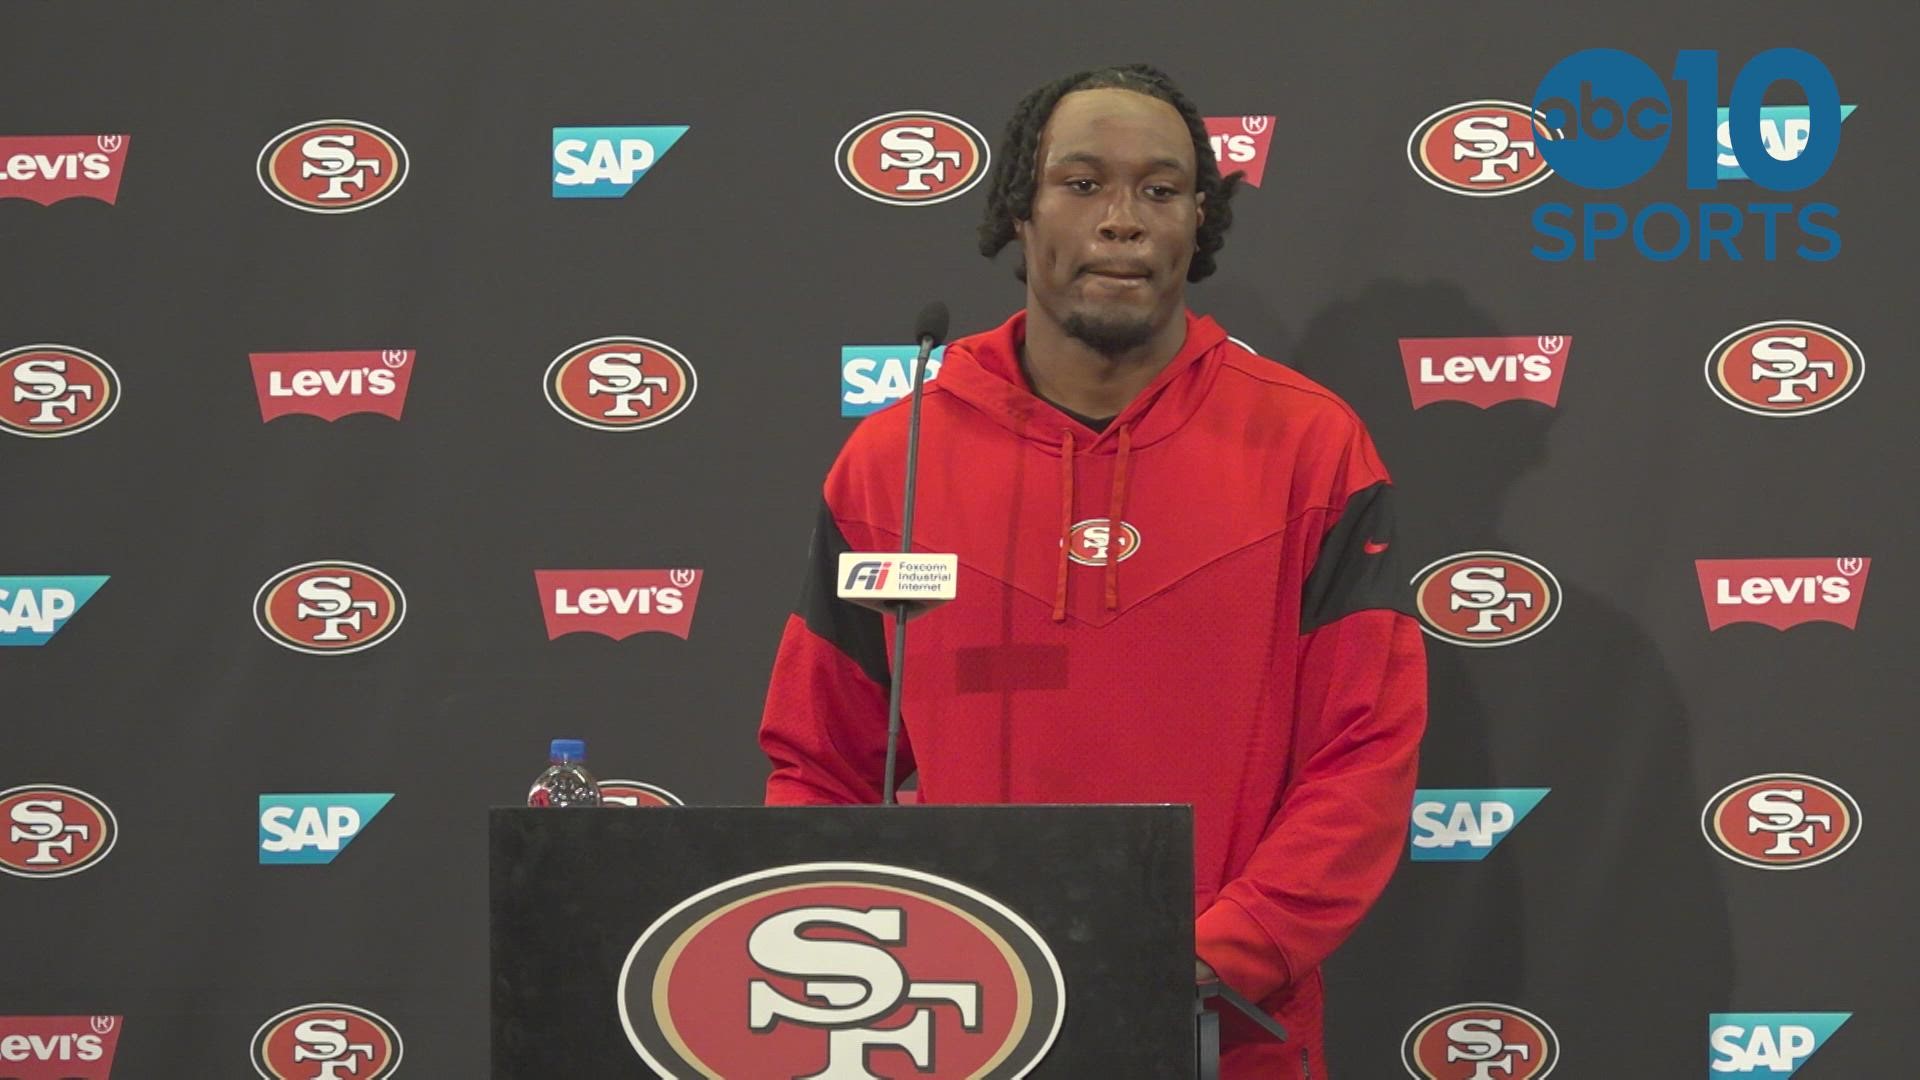 49ers defensive end Tarvarius Moore talks at a press conference about improvement on offense during the 2022 season and returning from an achillies injury.